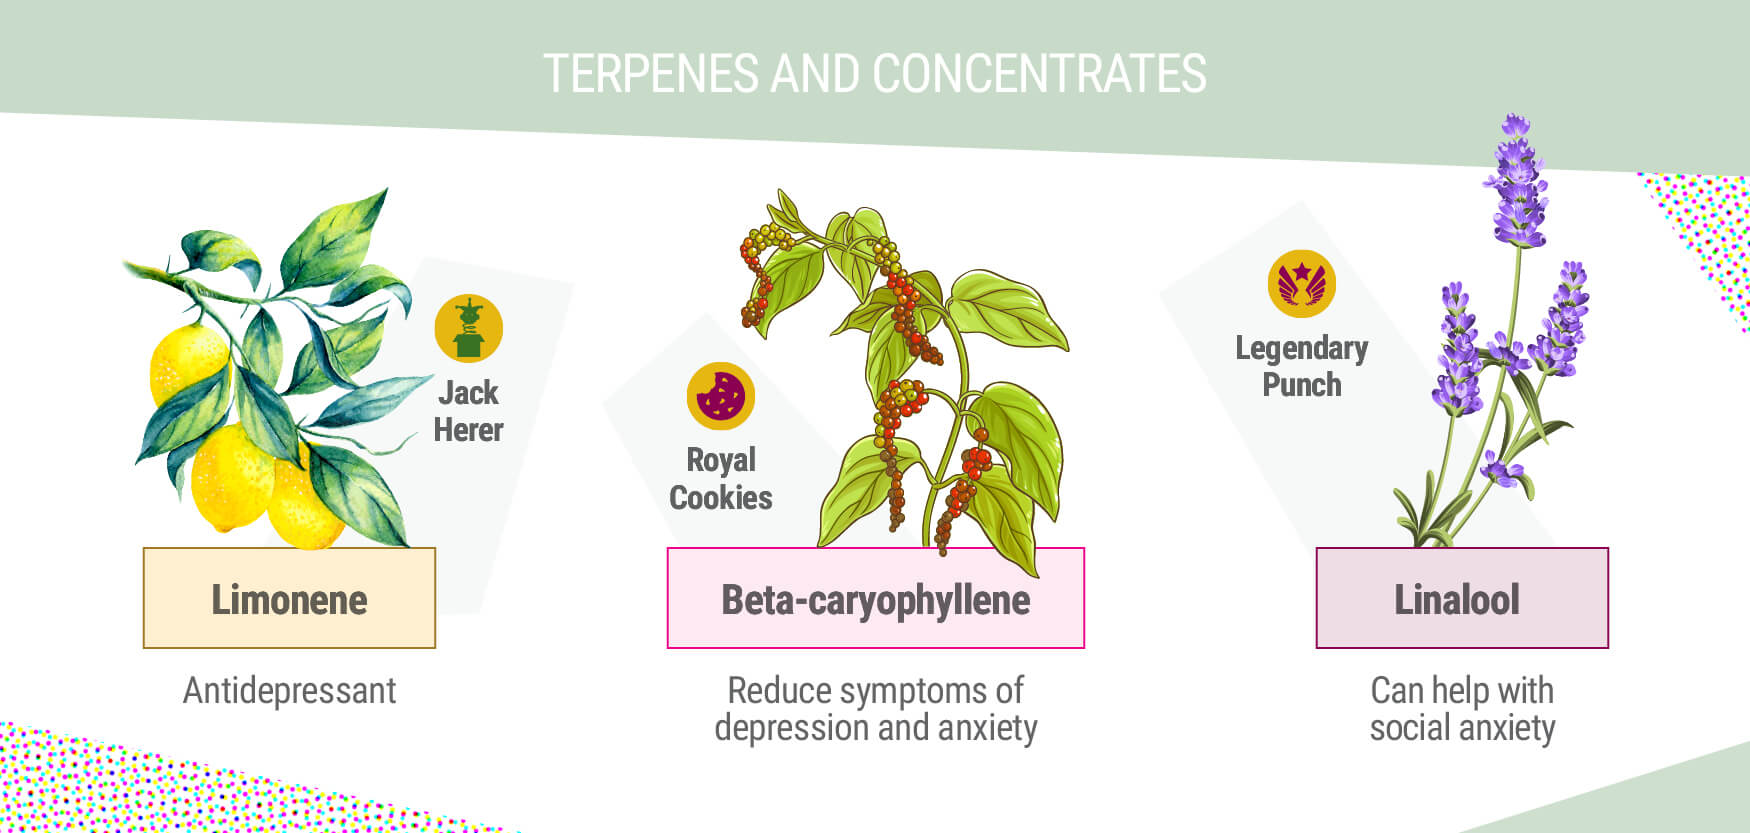 Terpenes and Concentrates